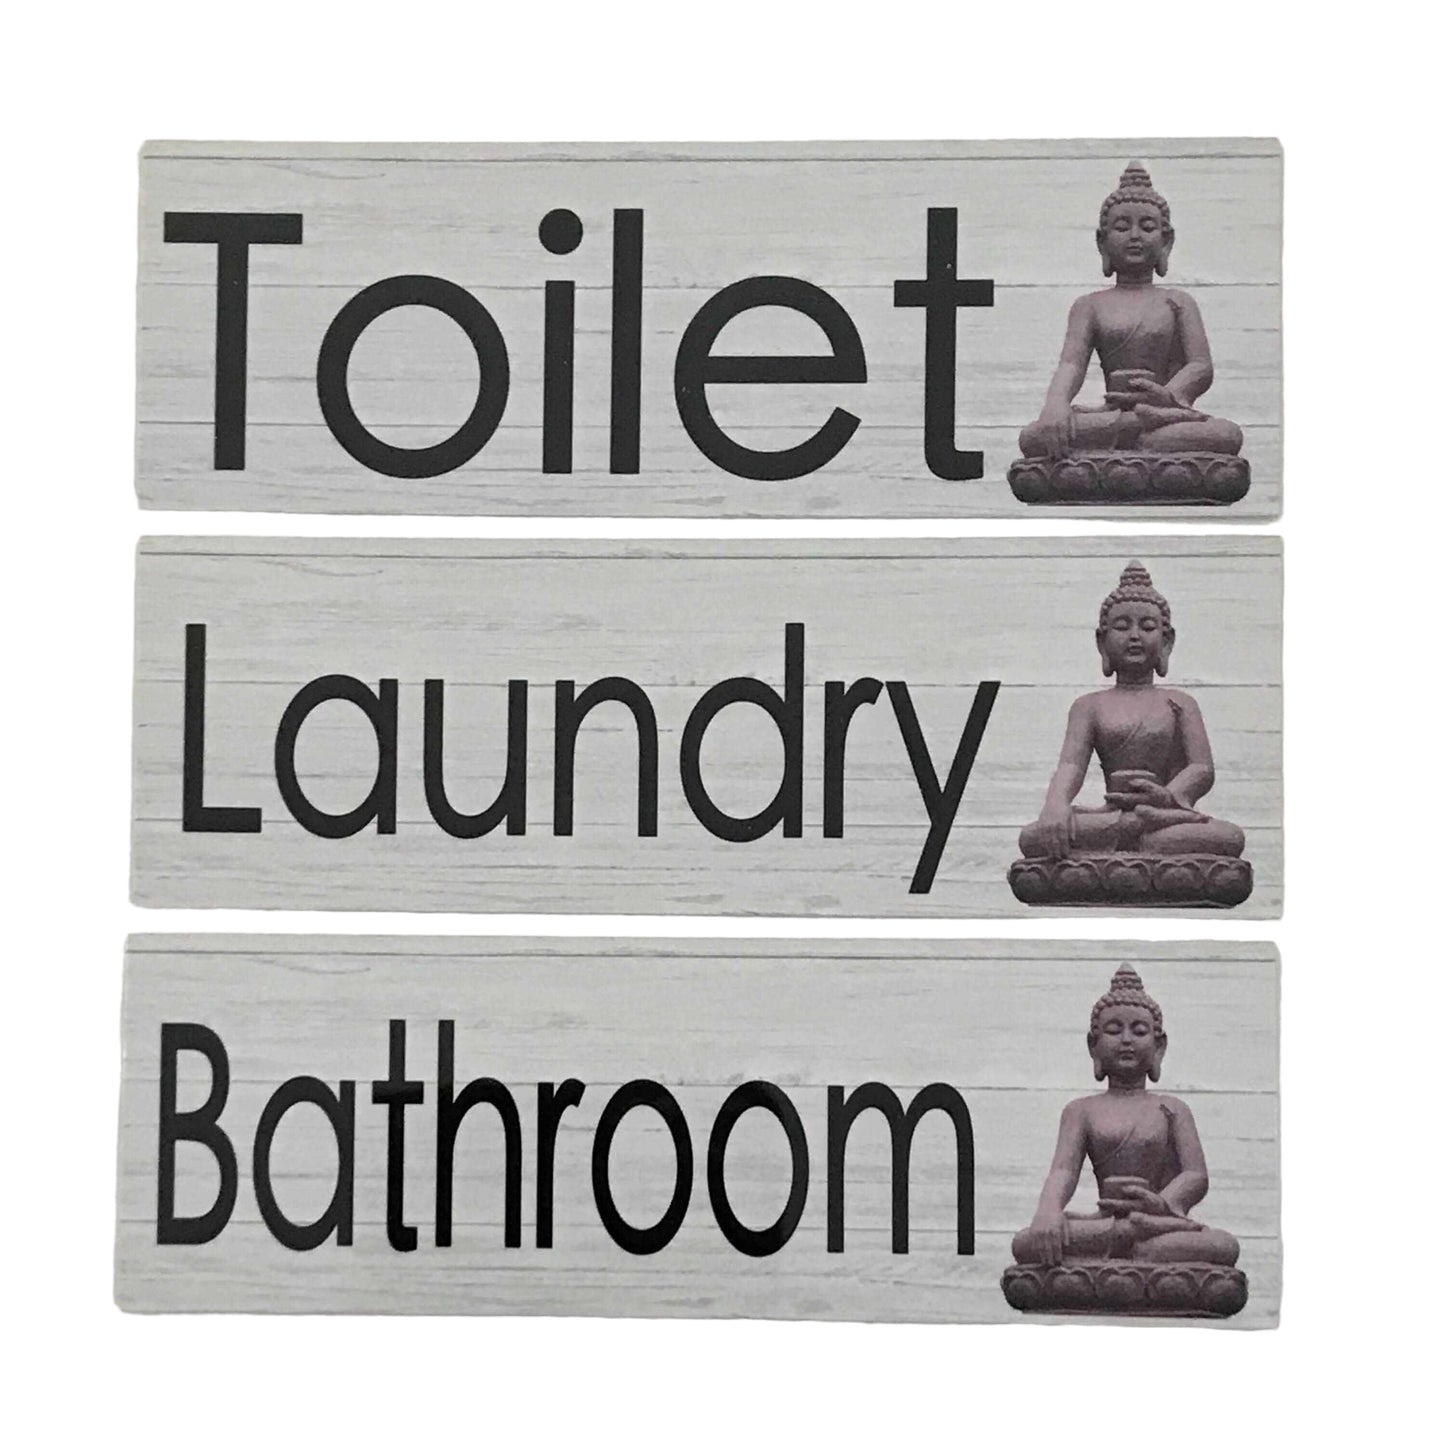 Buddha Toilet Laundry Bathroom Door Sign - The Renmy Store Homewares & Gifts 